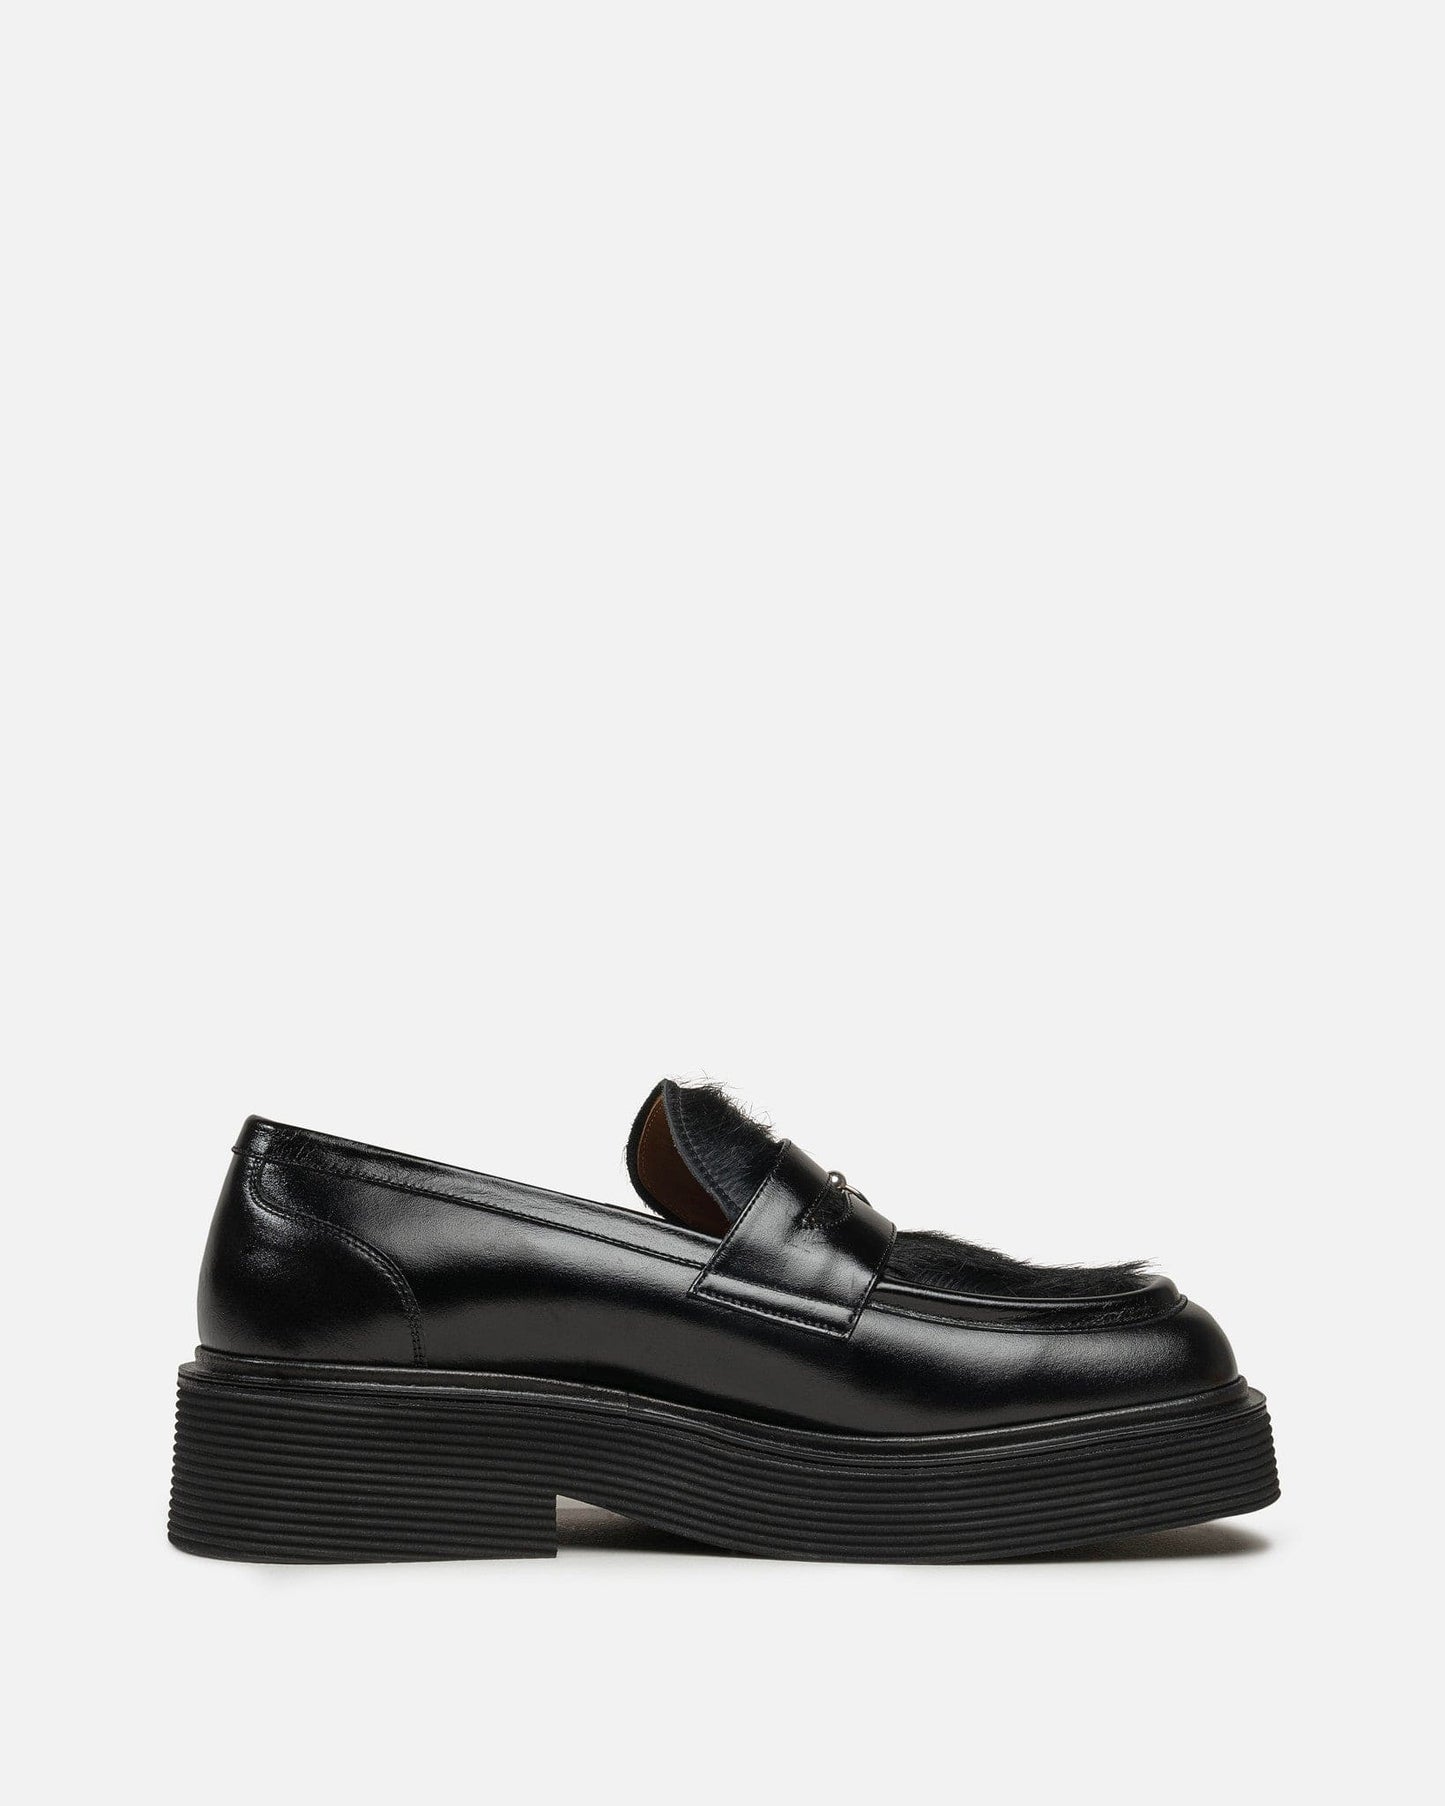 Marni Men's Shoes Pierced Hair Moccasins in Black